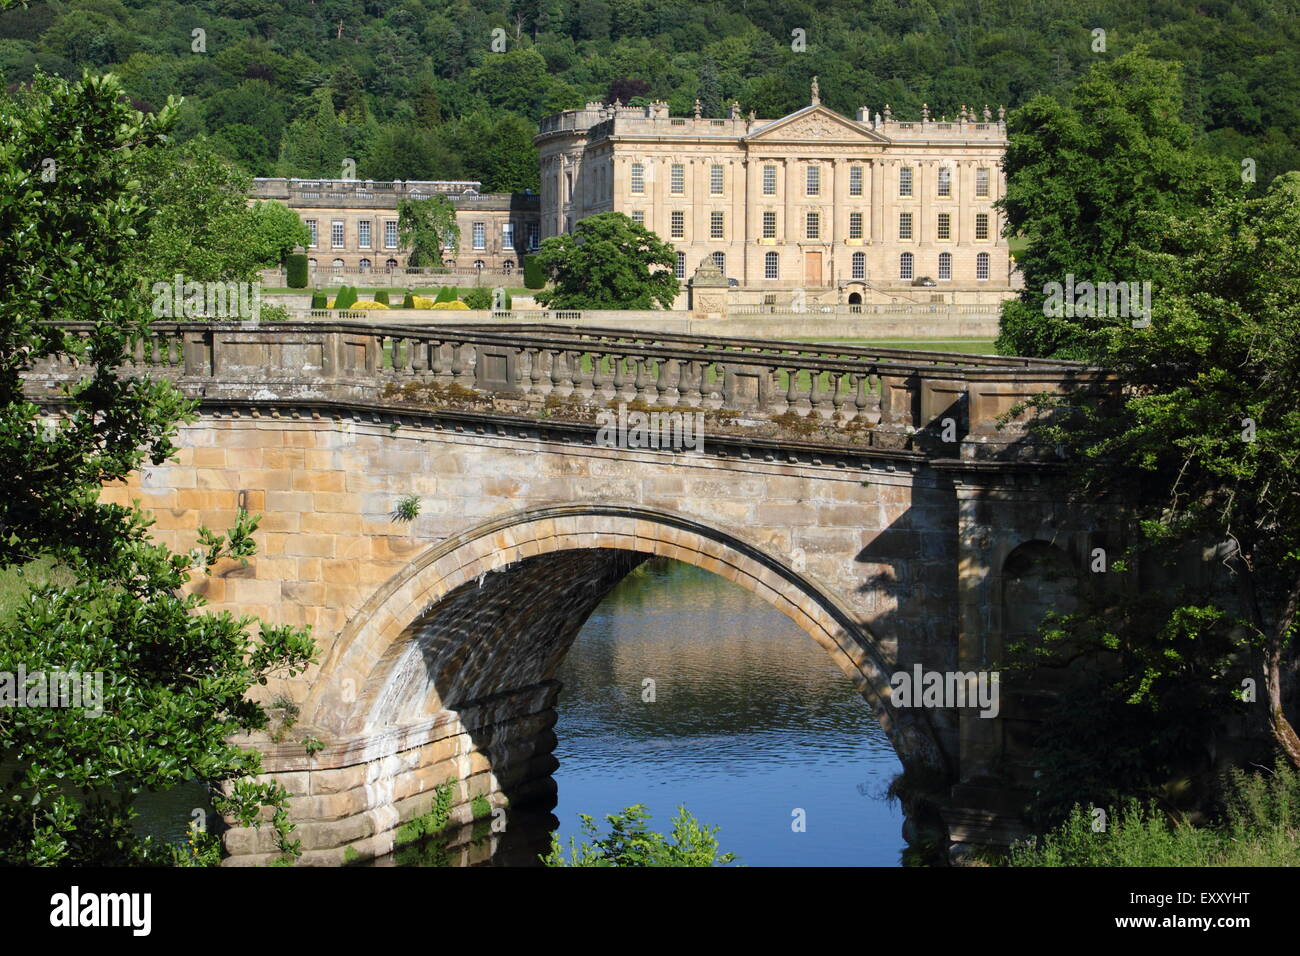 Chatsworh House from the arched bridge on the main approach to the Derbyshire stately home, Peak District,  England UK Stock Photo